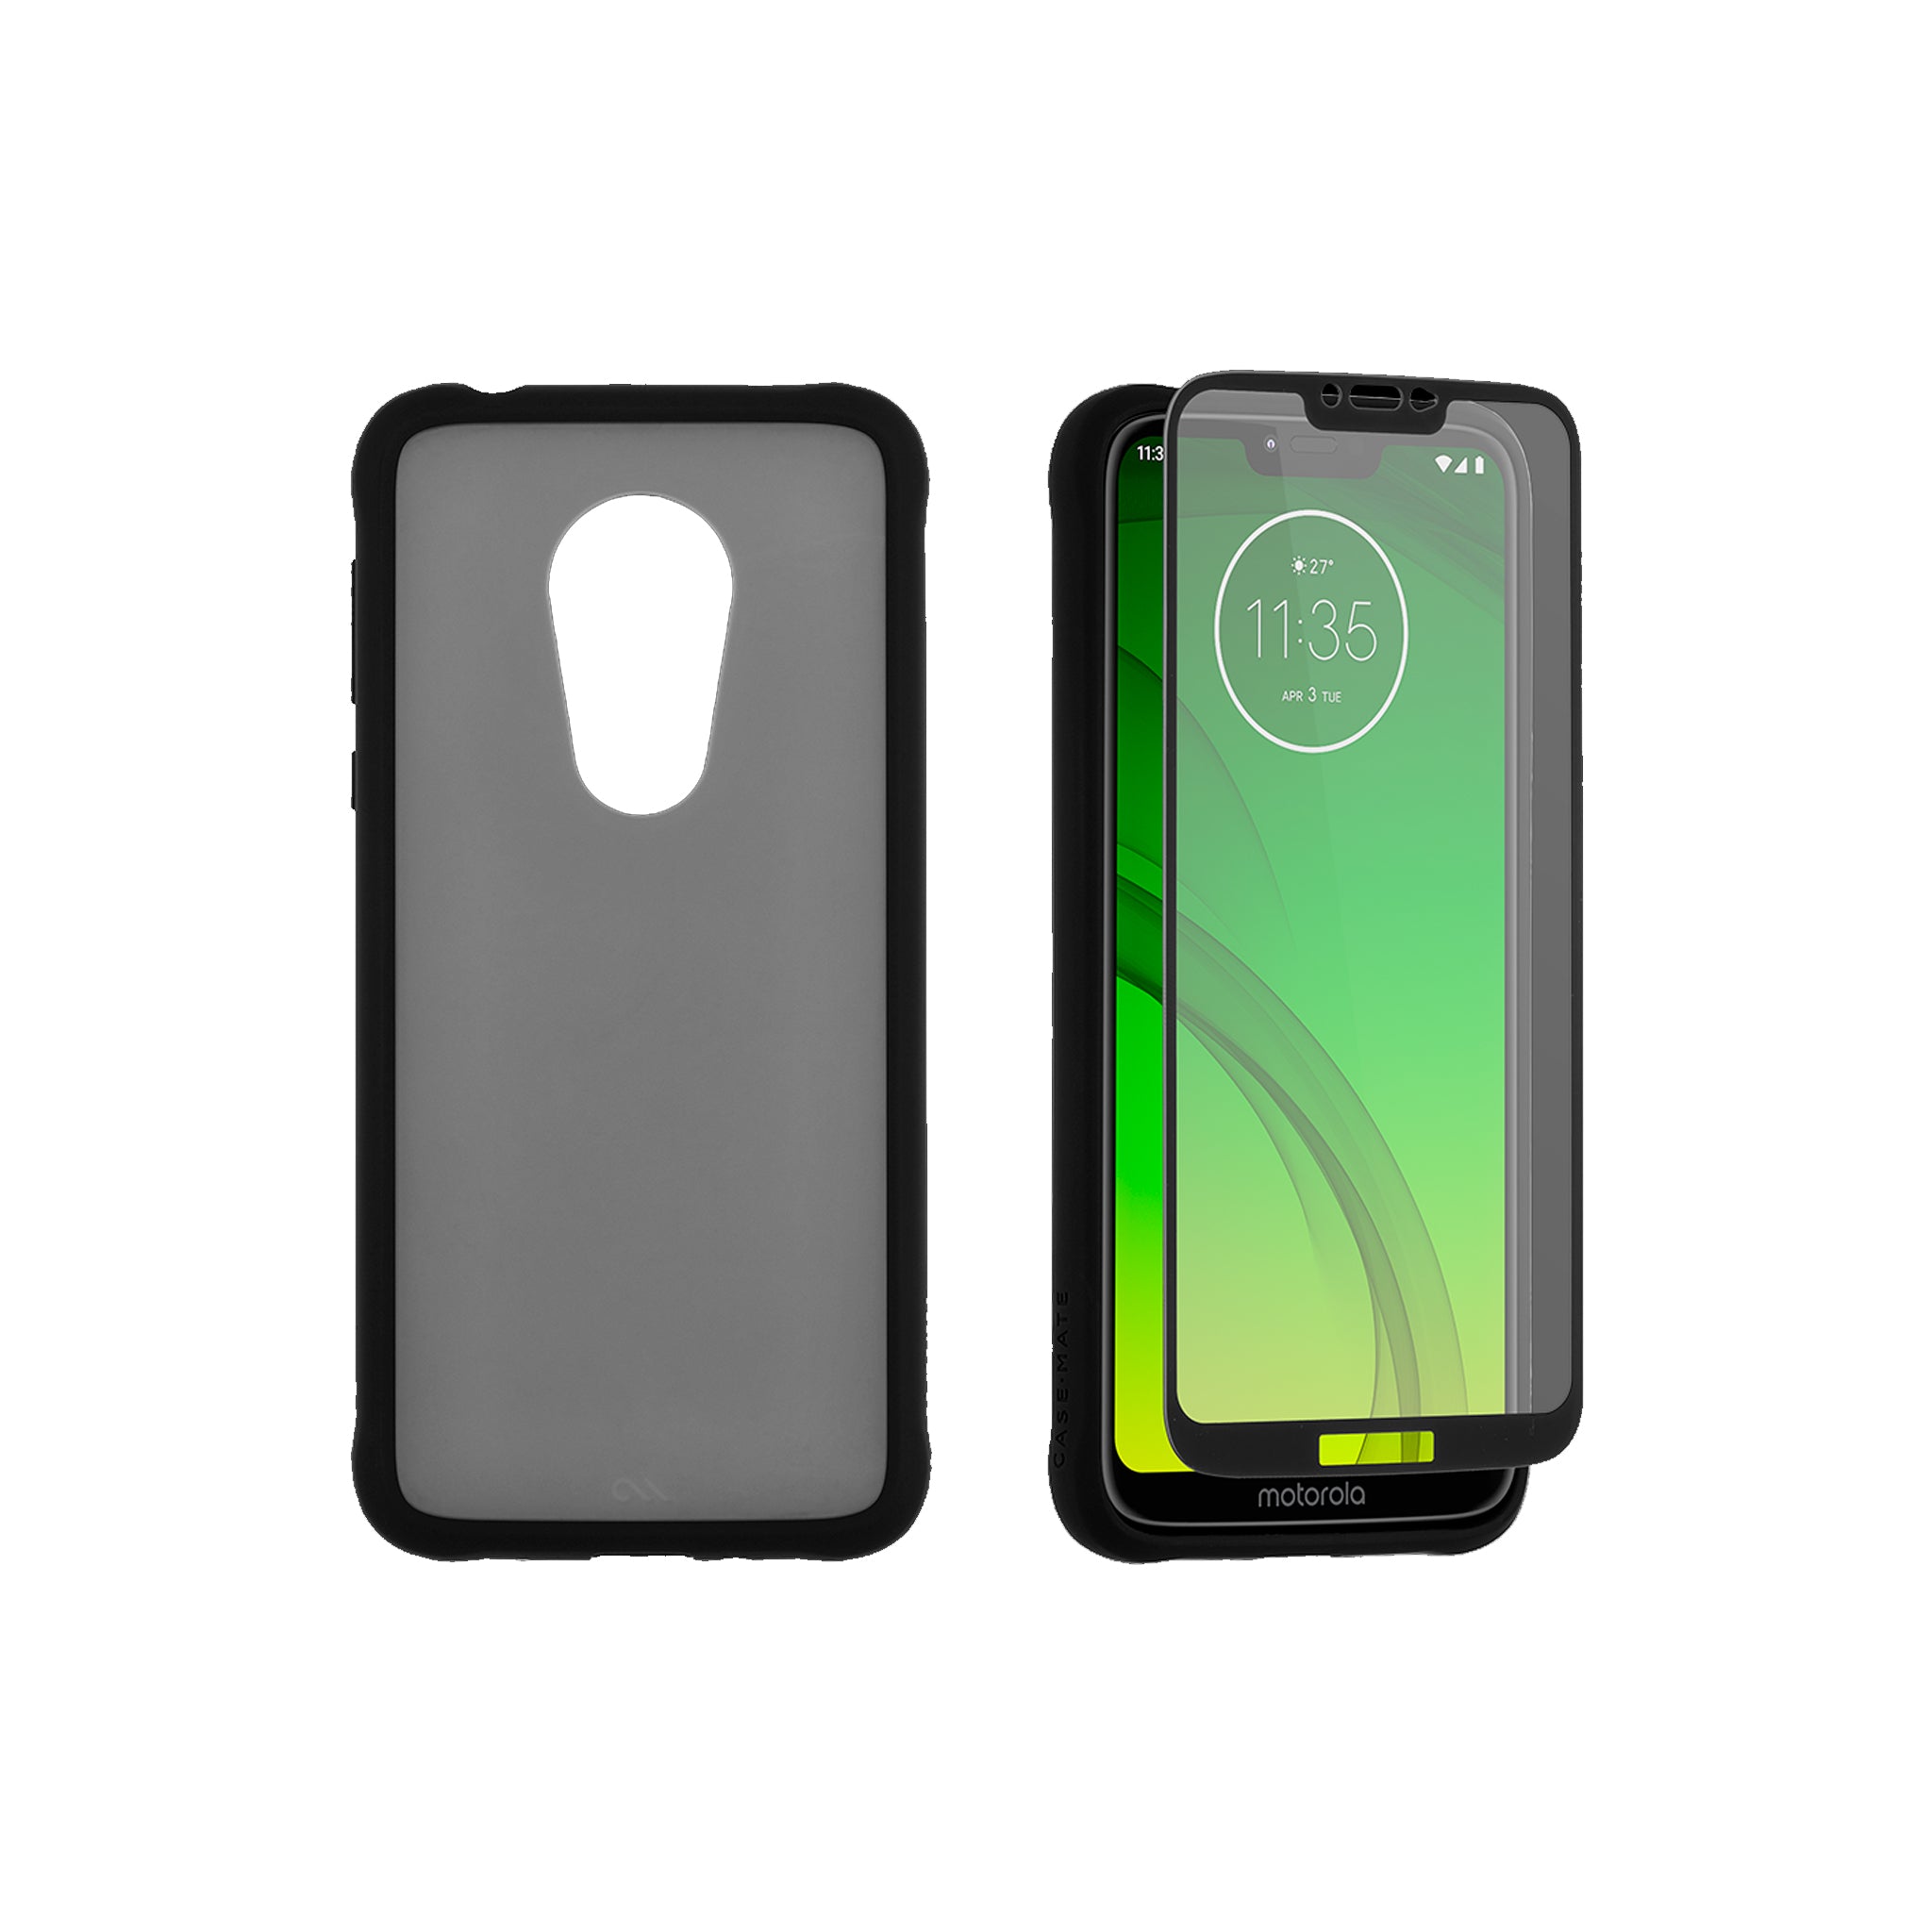 Case-mate - Protection Pack Tough Case And Glass Screen Protector For Motorola Moto G7 Power - Black